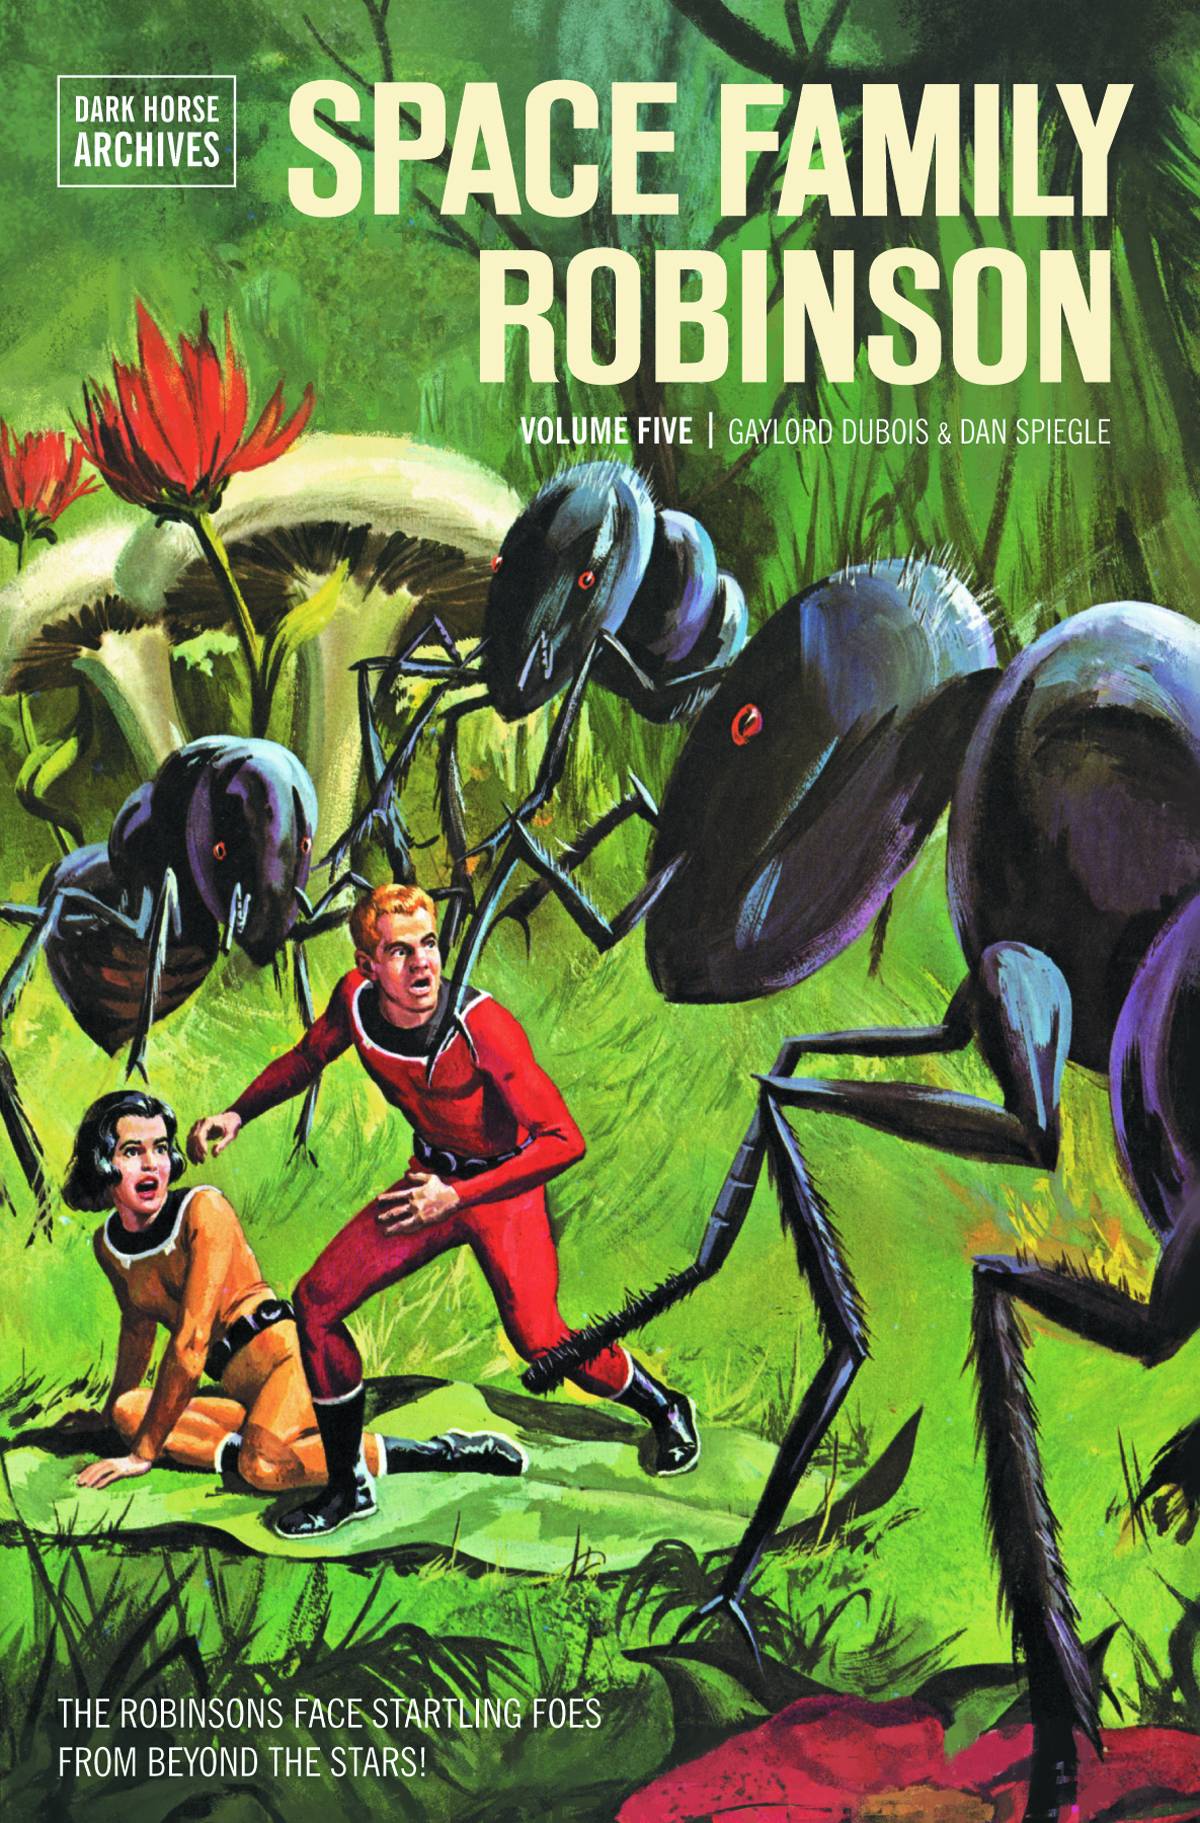 Space Family Robinson Archives Hardcover Volume 5